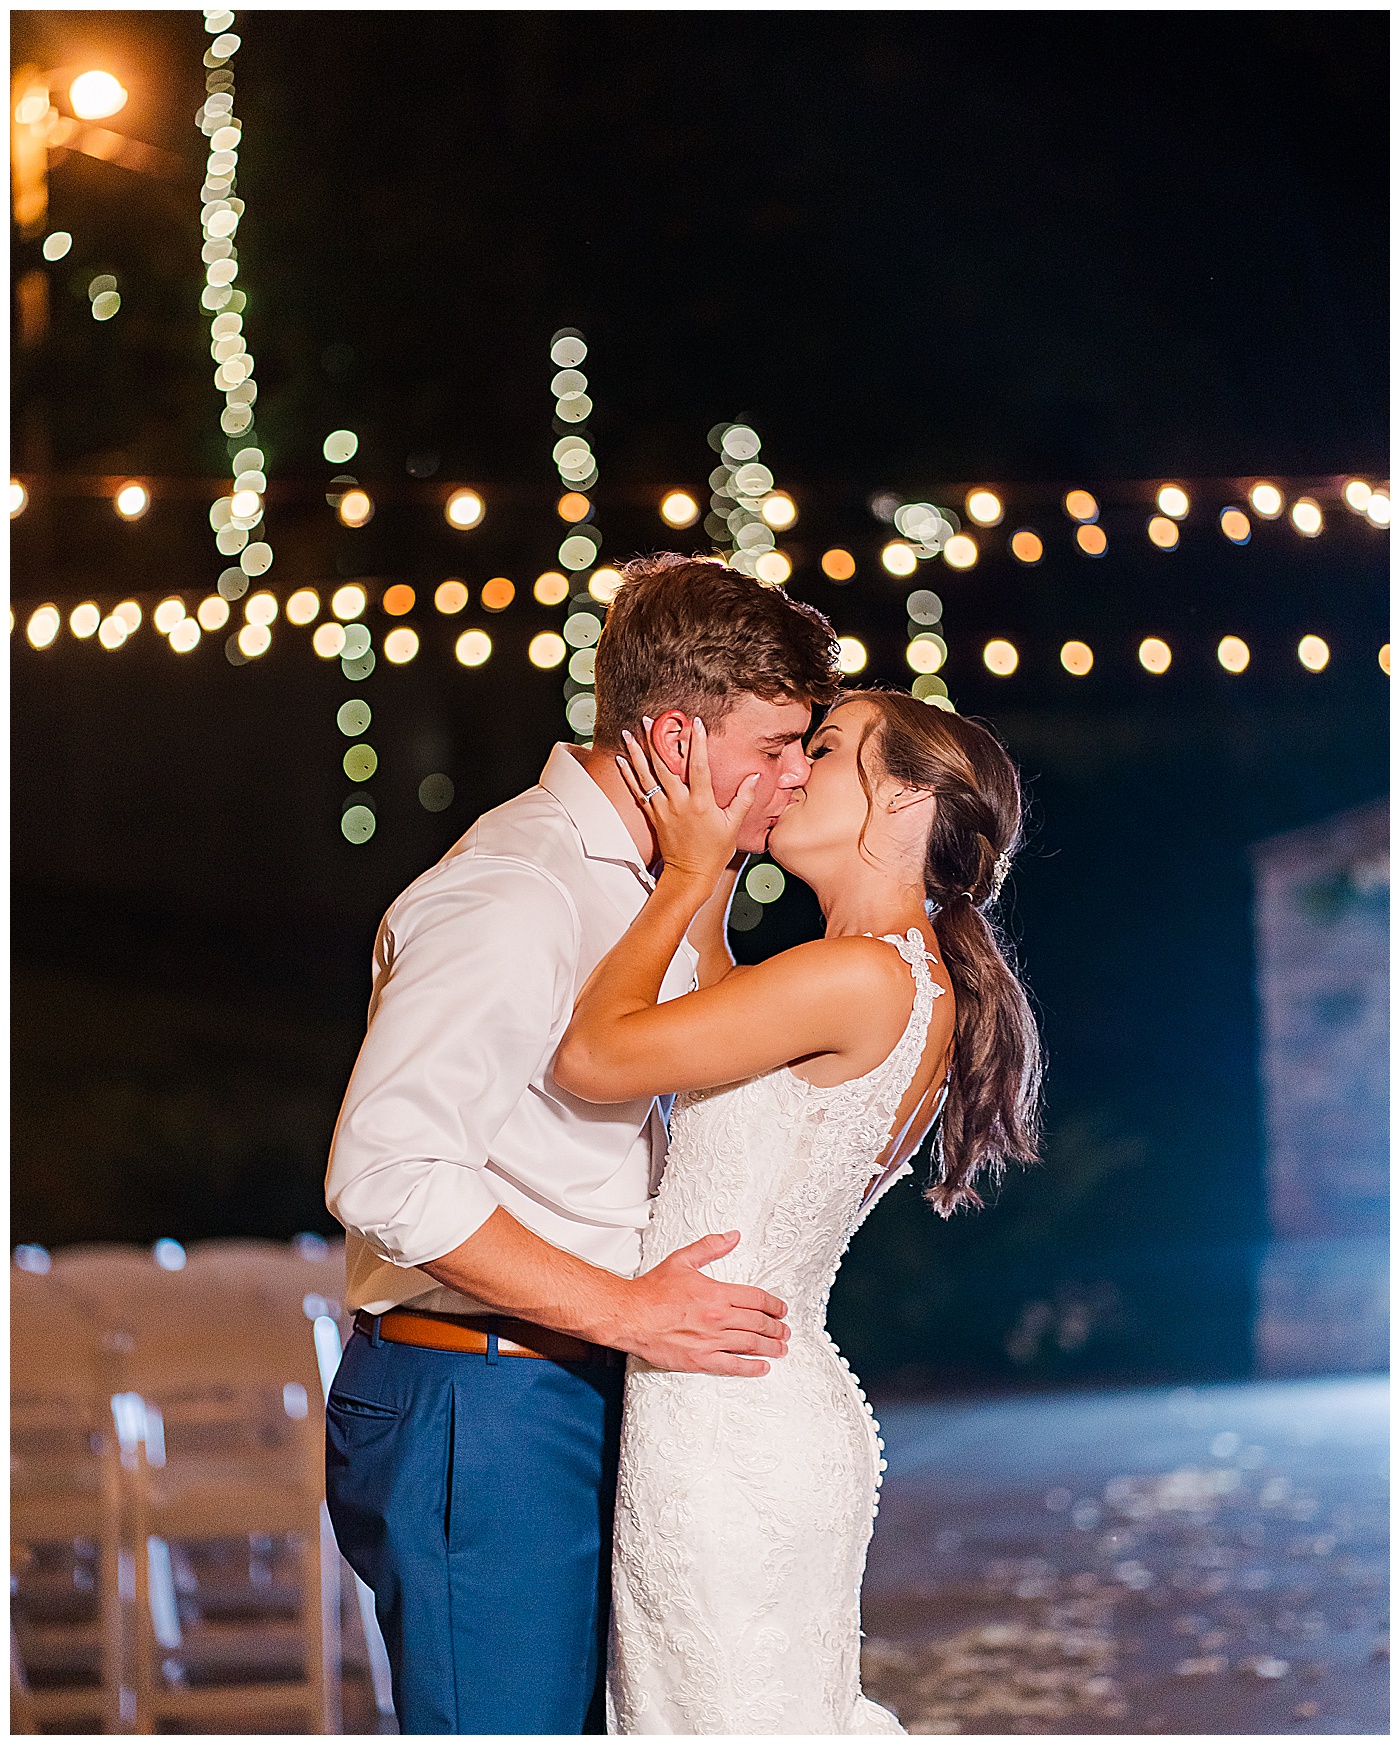 Bride and Groom Kissing outside at night